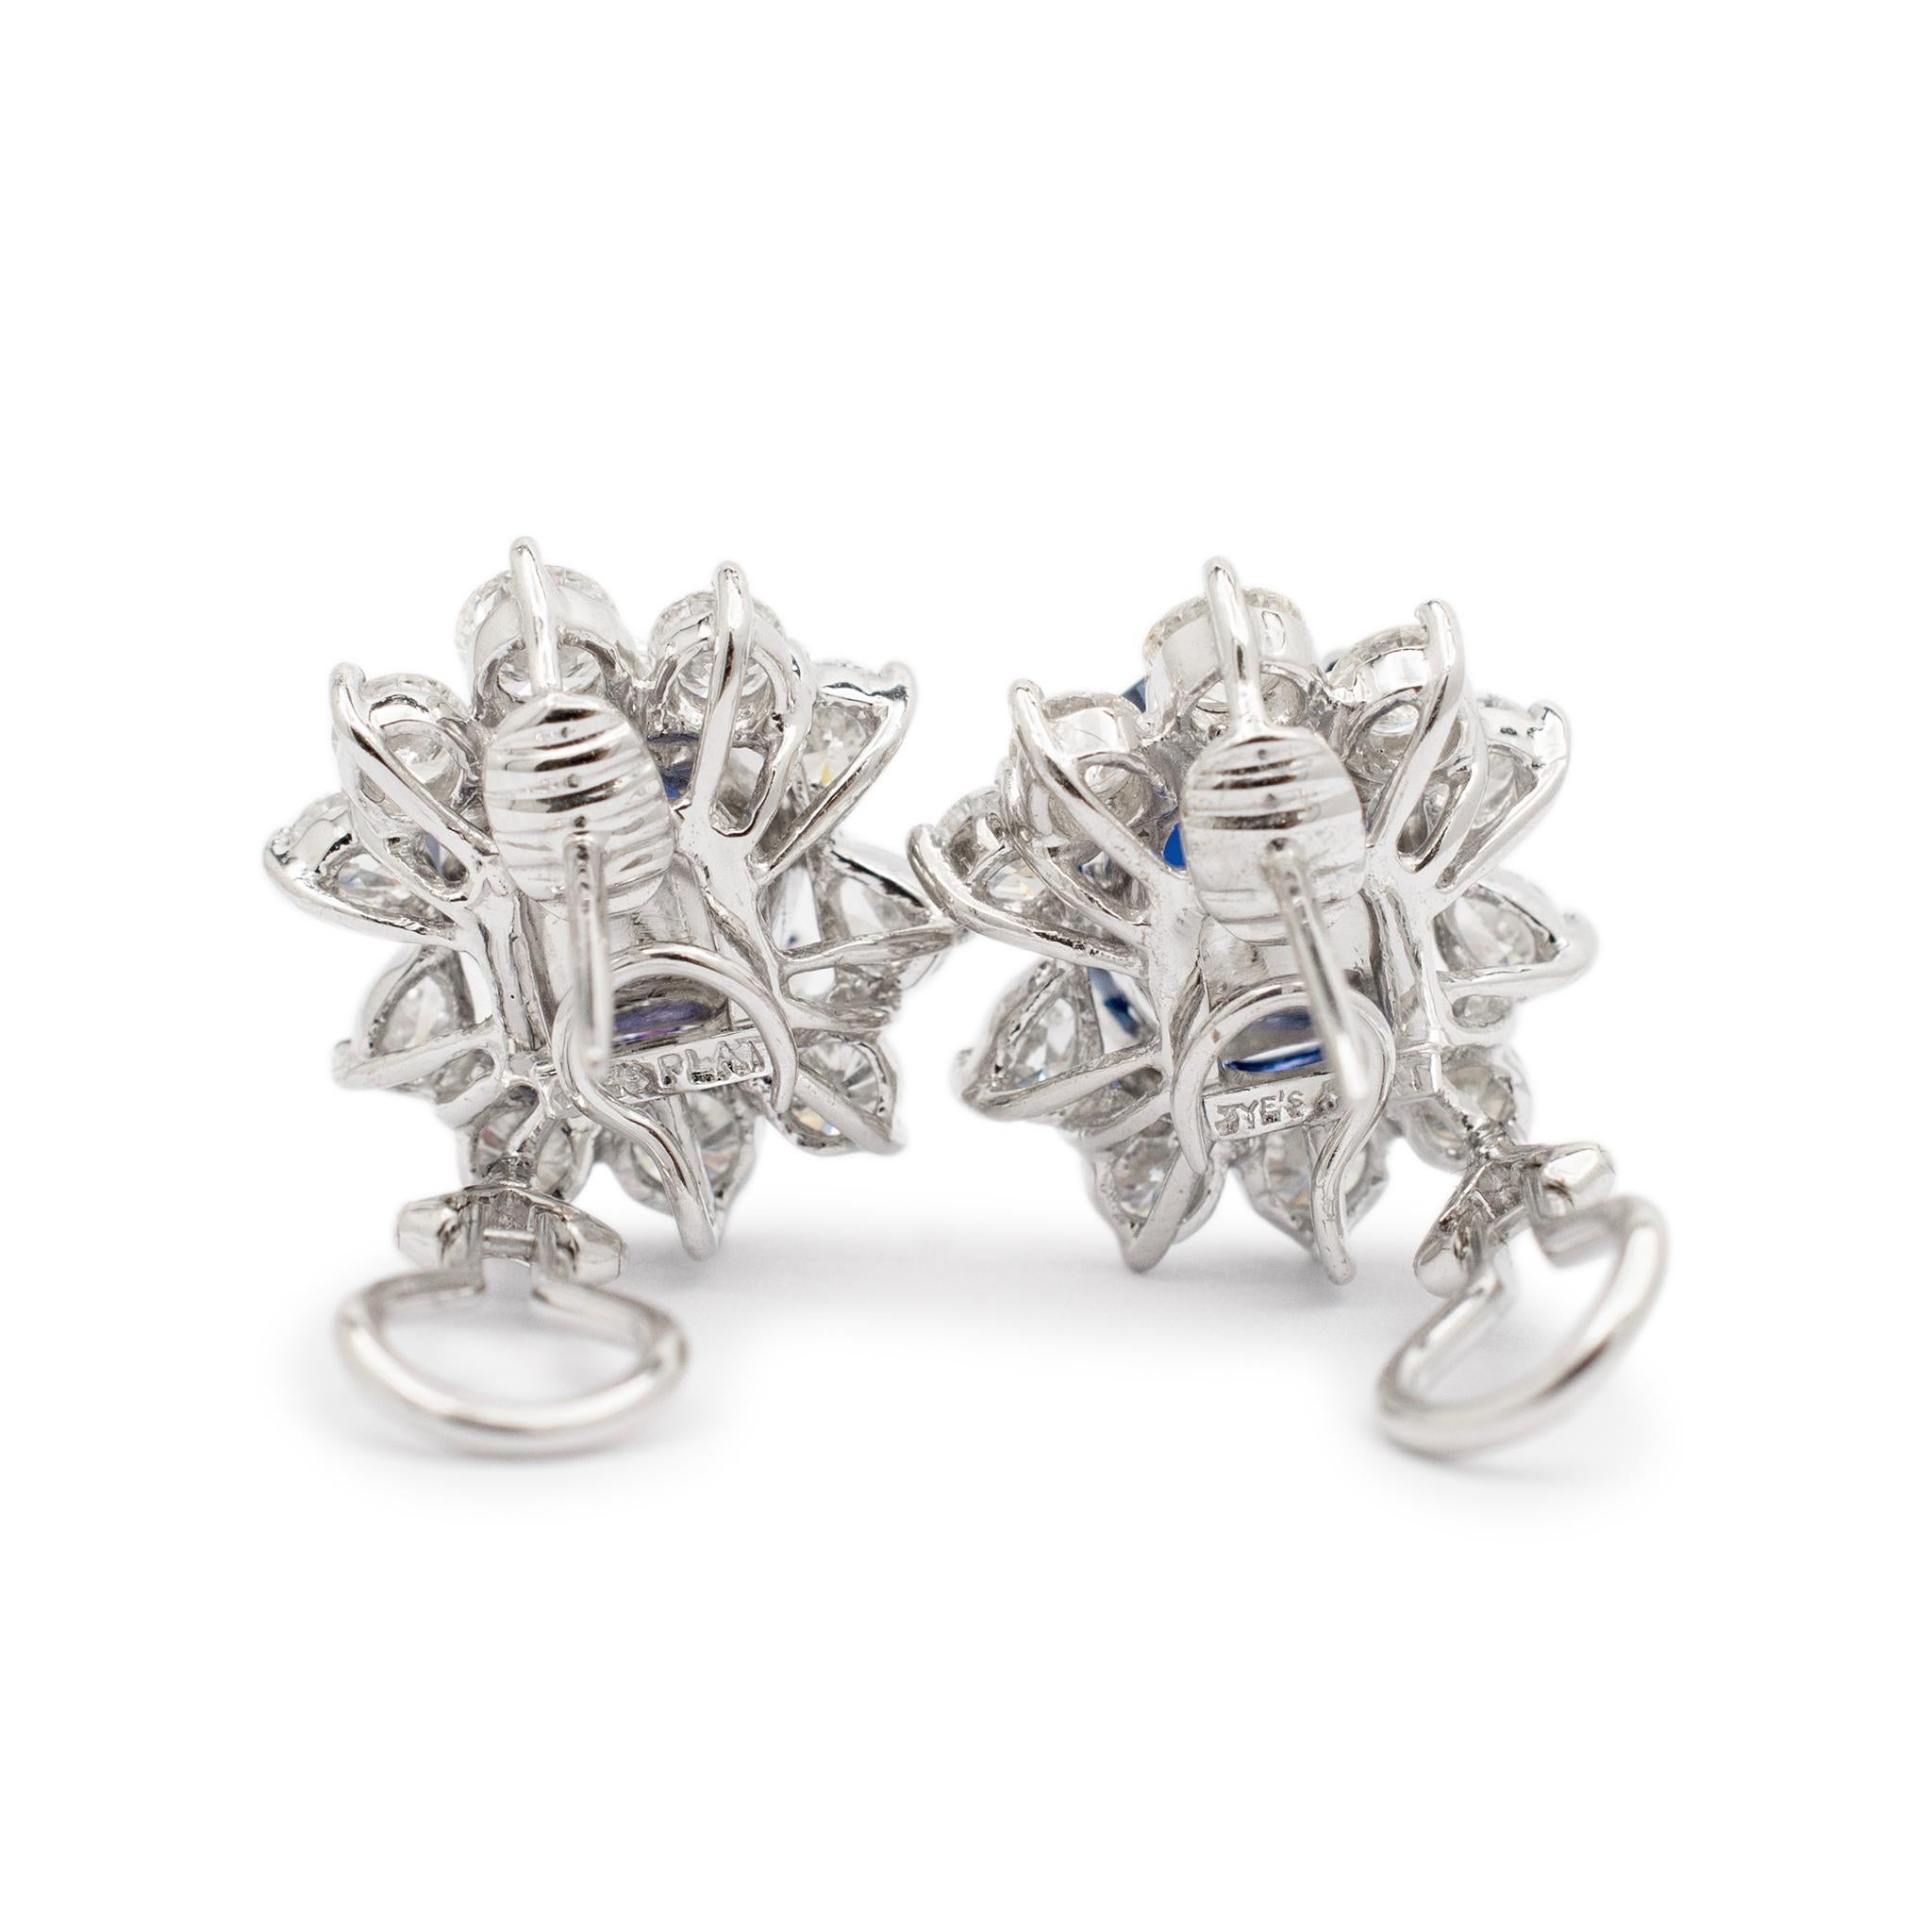 Gender: Ladies

Metal Type: Platinum & 18K White Gold

Length: 0.50 mm

Width: 16.95 mm

Weight: 18.14 grams

Ladies platinum and 18K white gold diamond and sapphire drop halo earrings with 